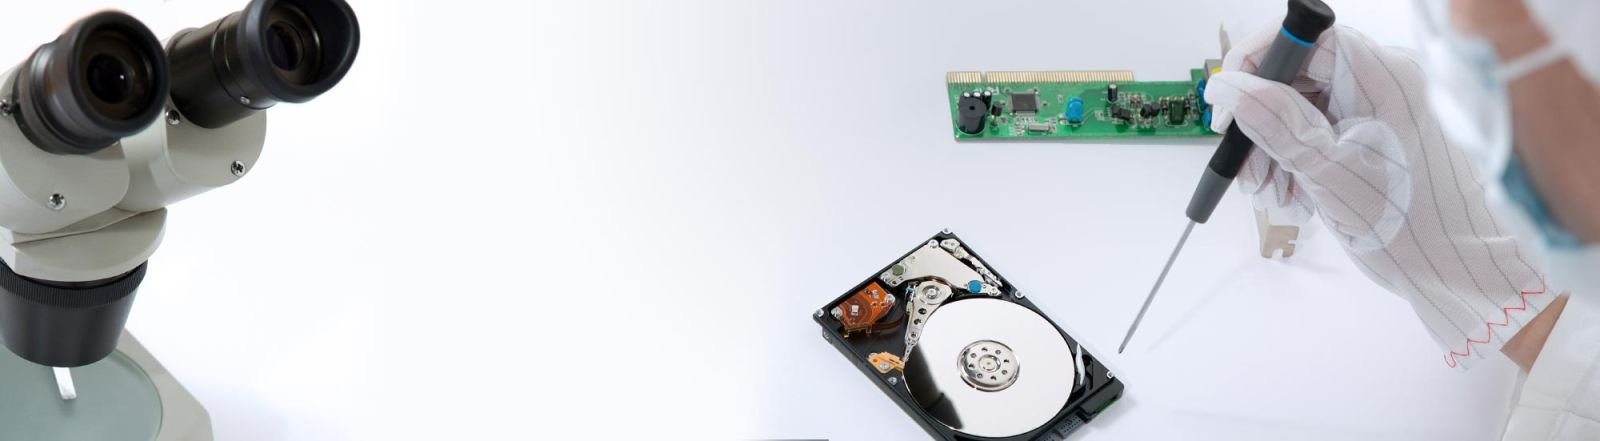 SSD Data Recovery